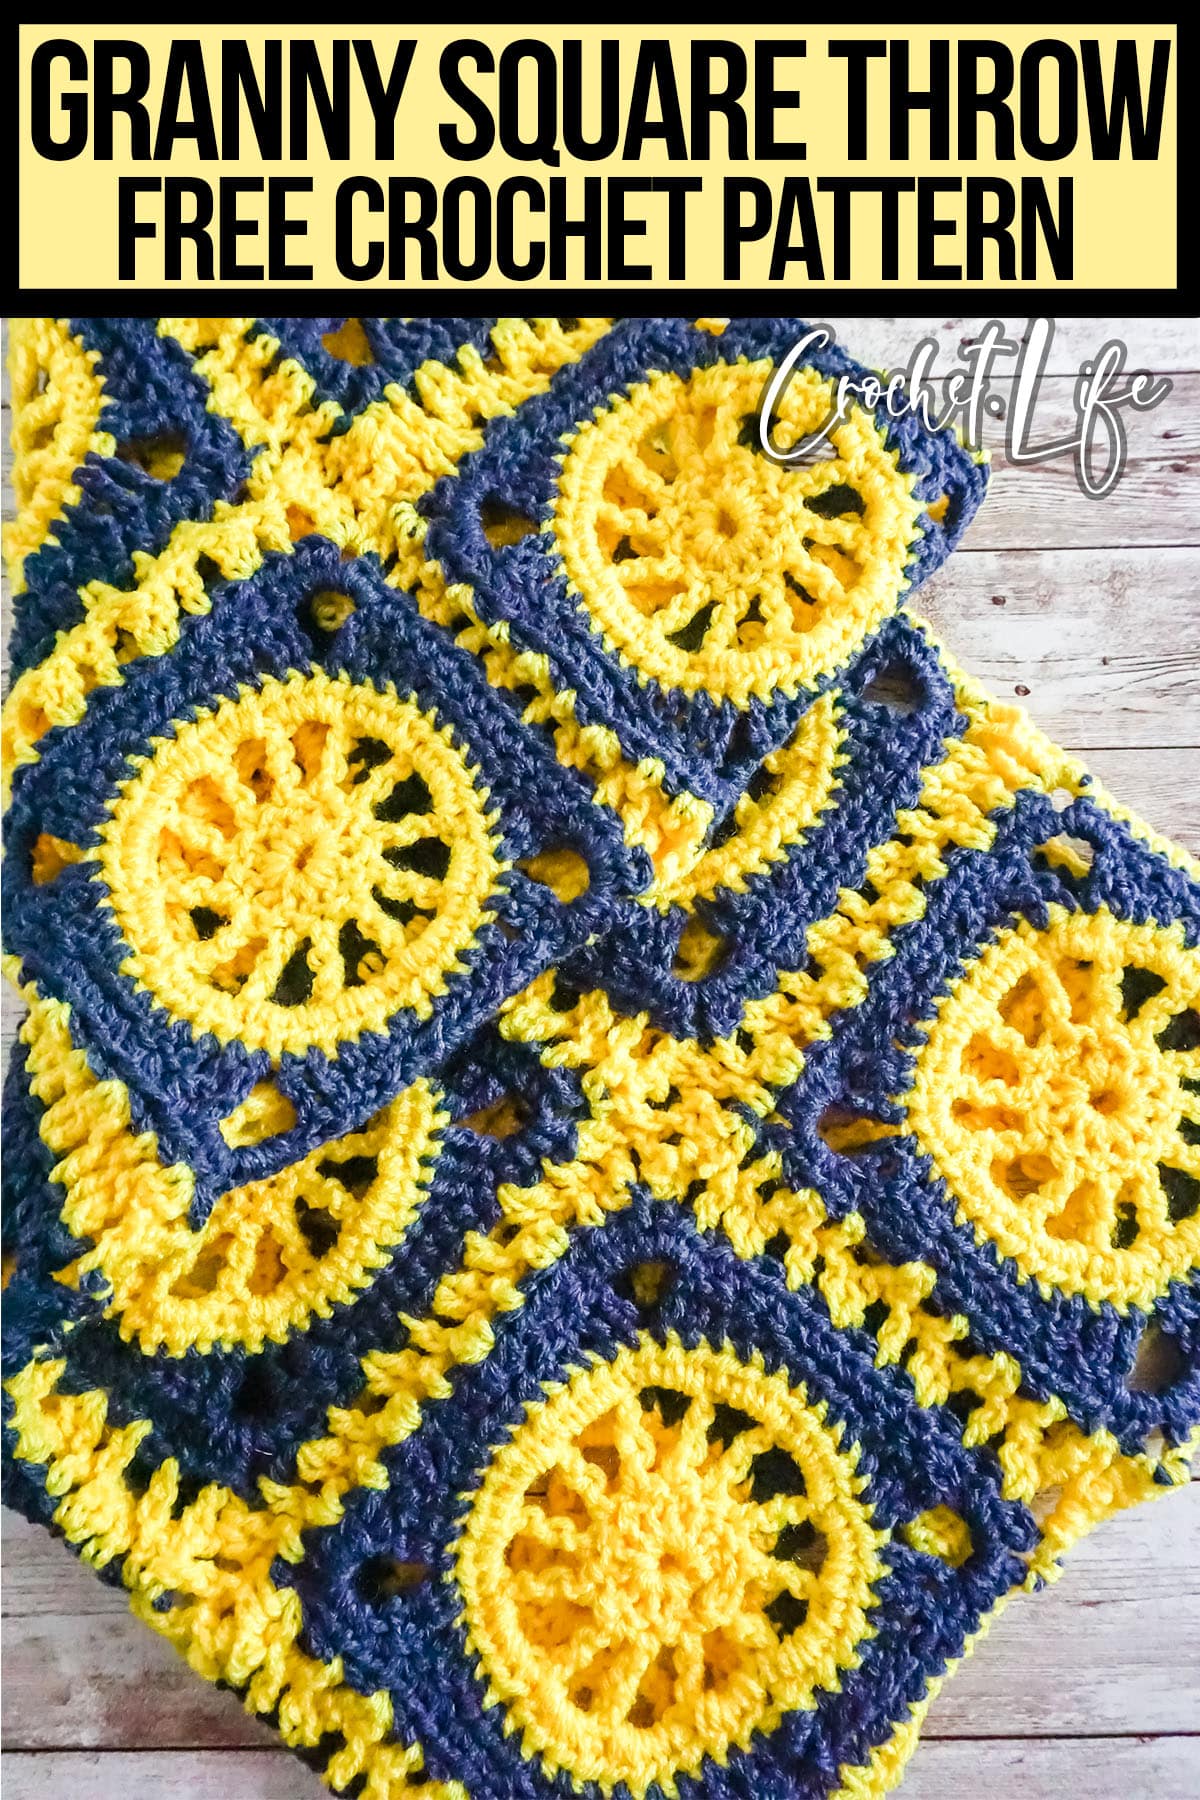 granny square blanket crochet pattern with text which reads granny square throw free crochet pattern